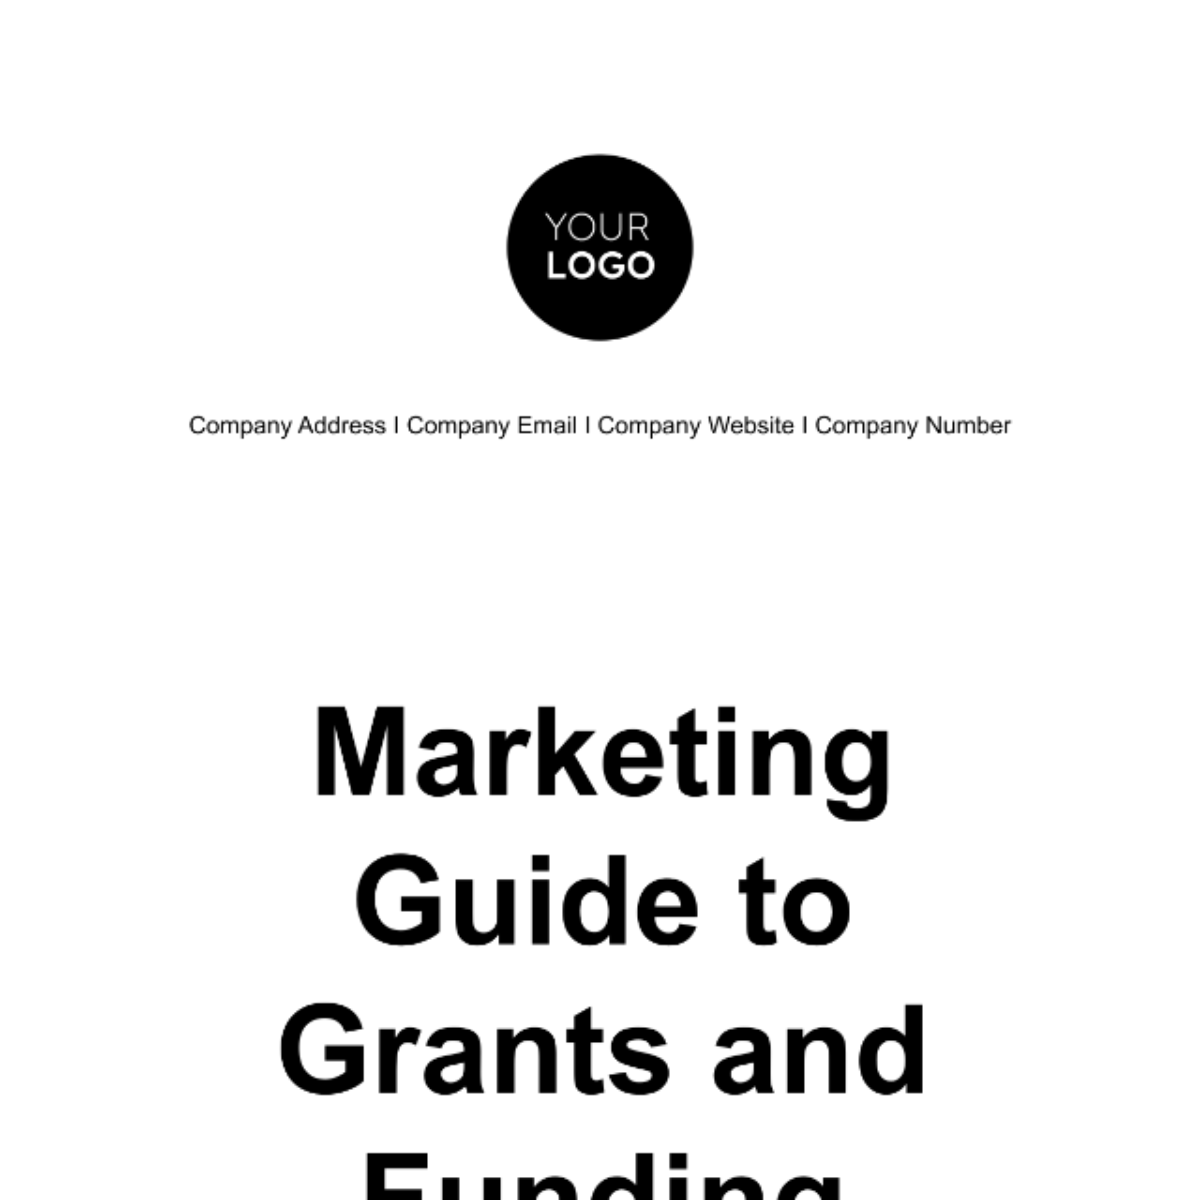 Free Marketing Guide to Grants and Funding Template